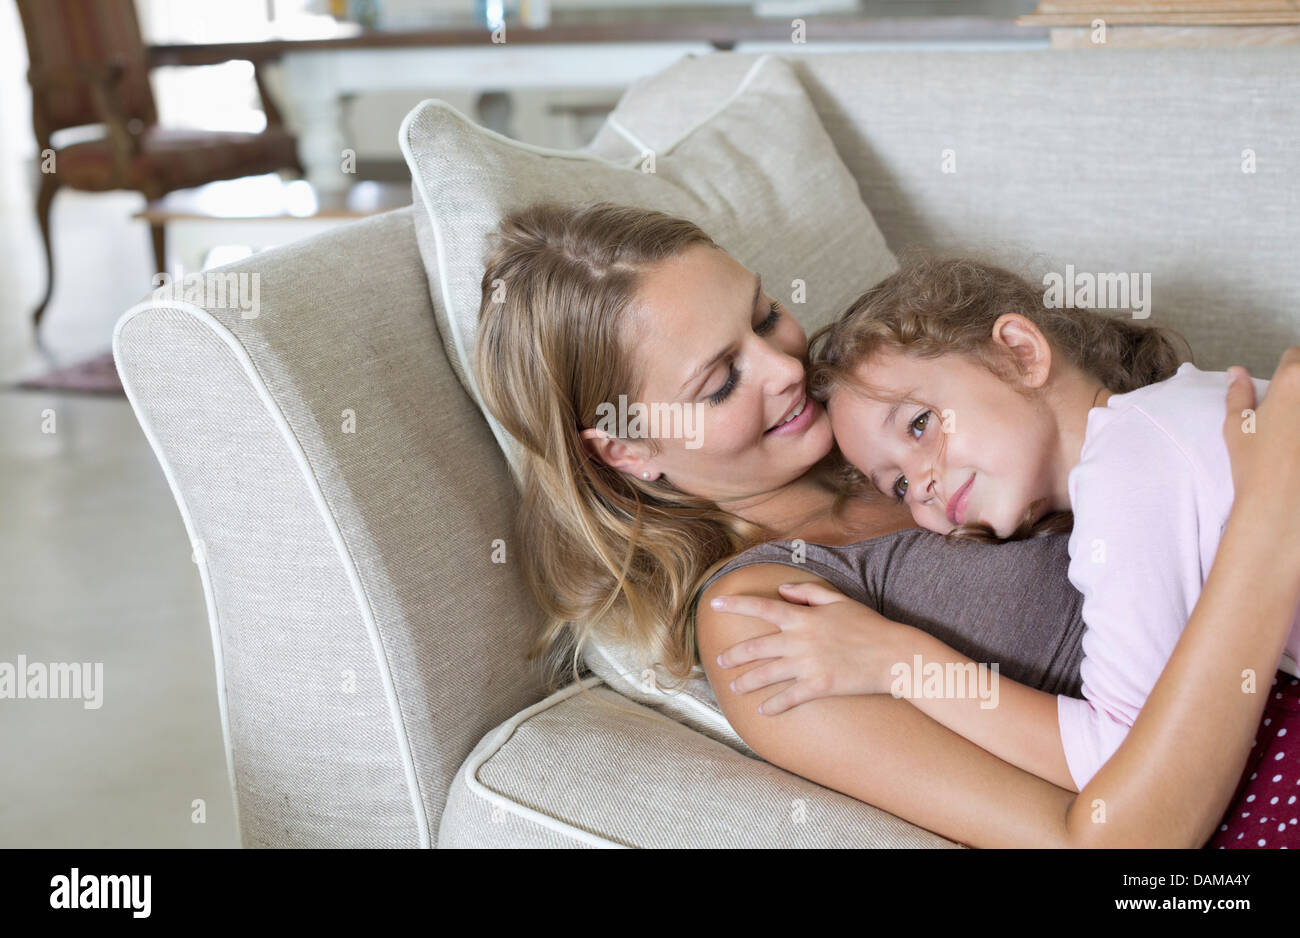 Mother and daughter relaxing on sofa Stock Photo